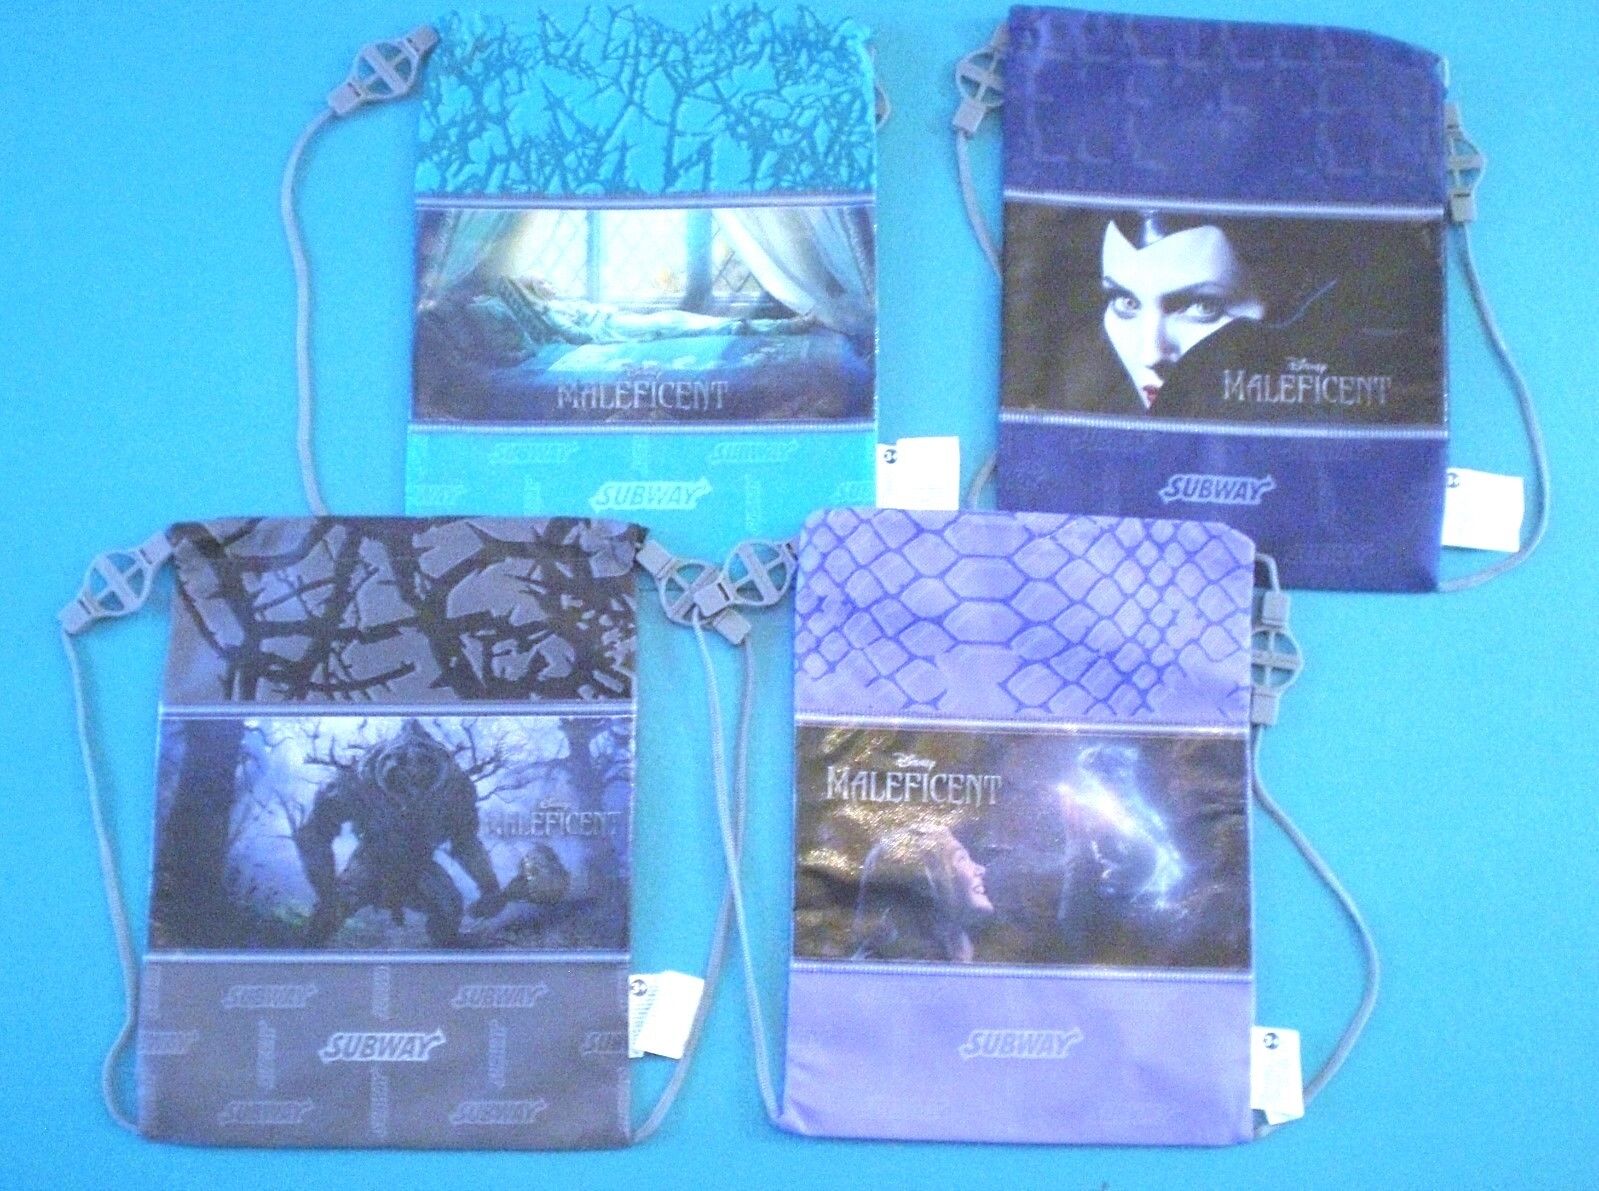 Subway 2014 - Maleficent Duffle Bags - Complete Set of 4